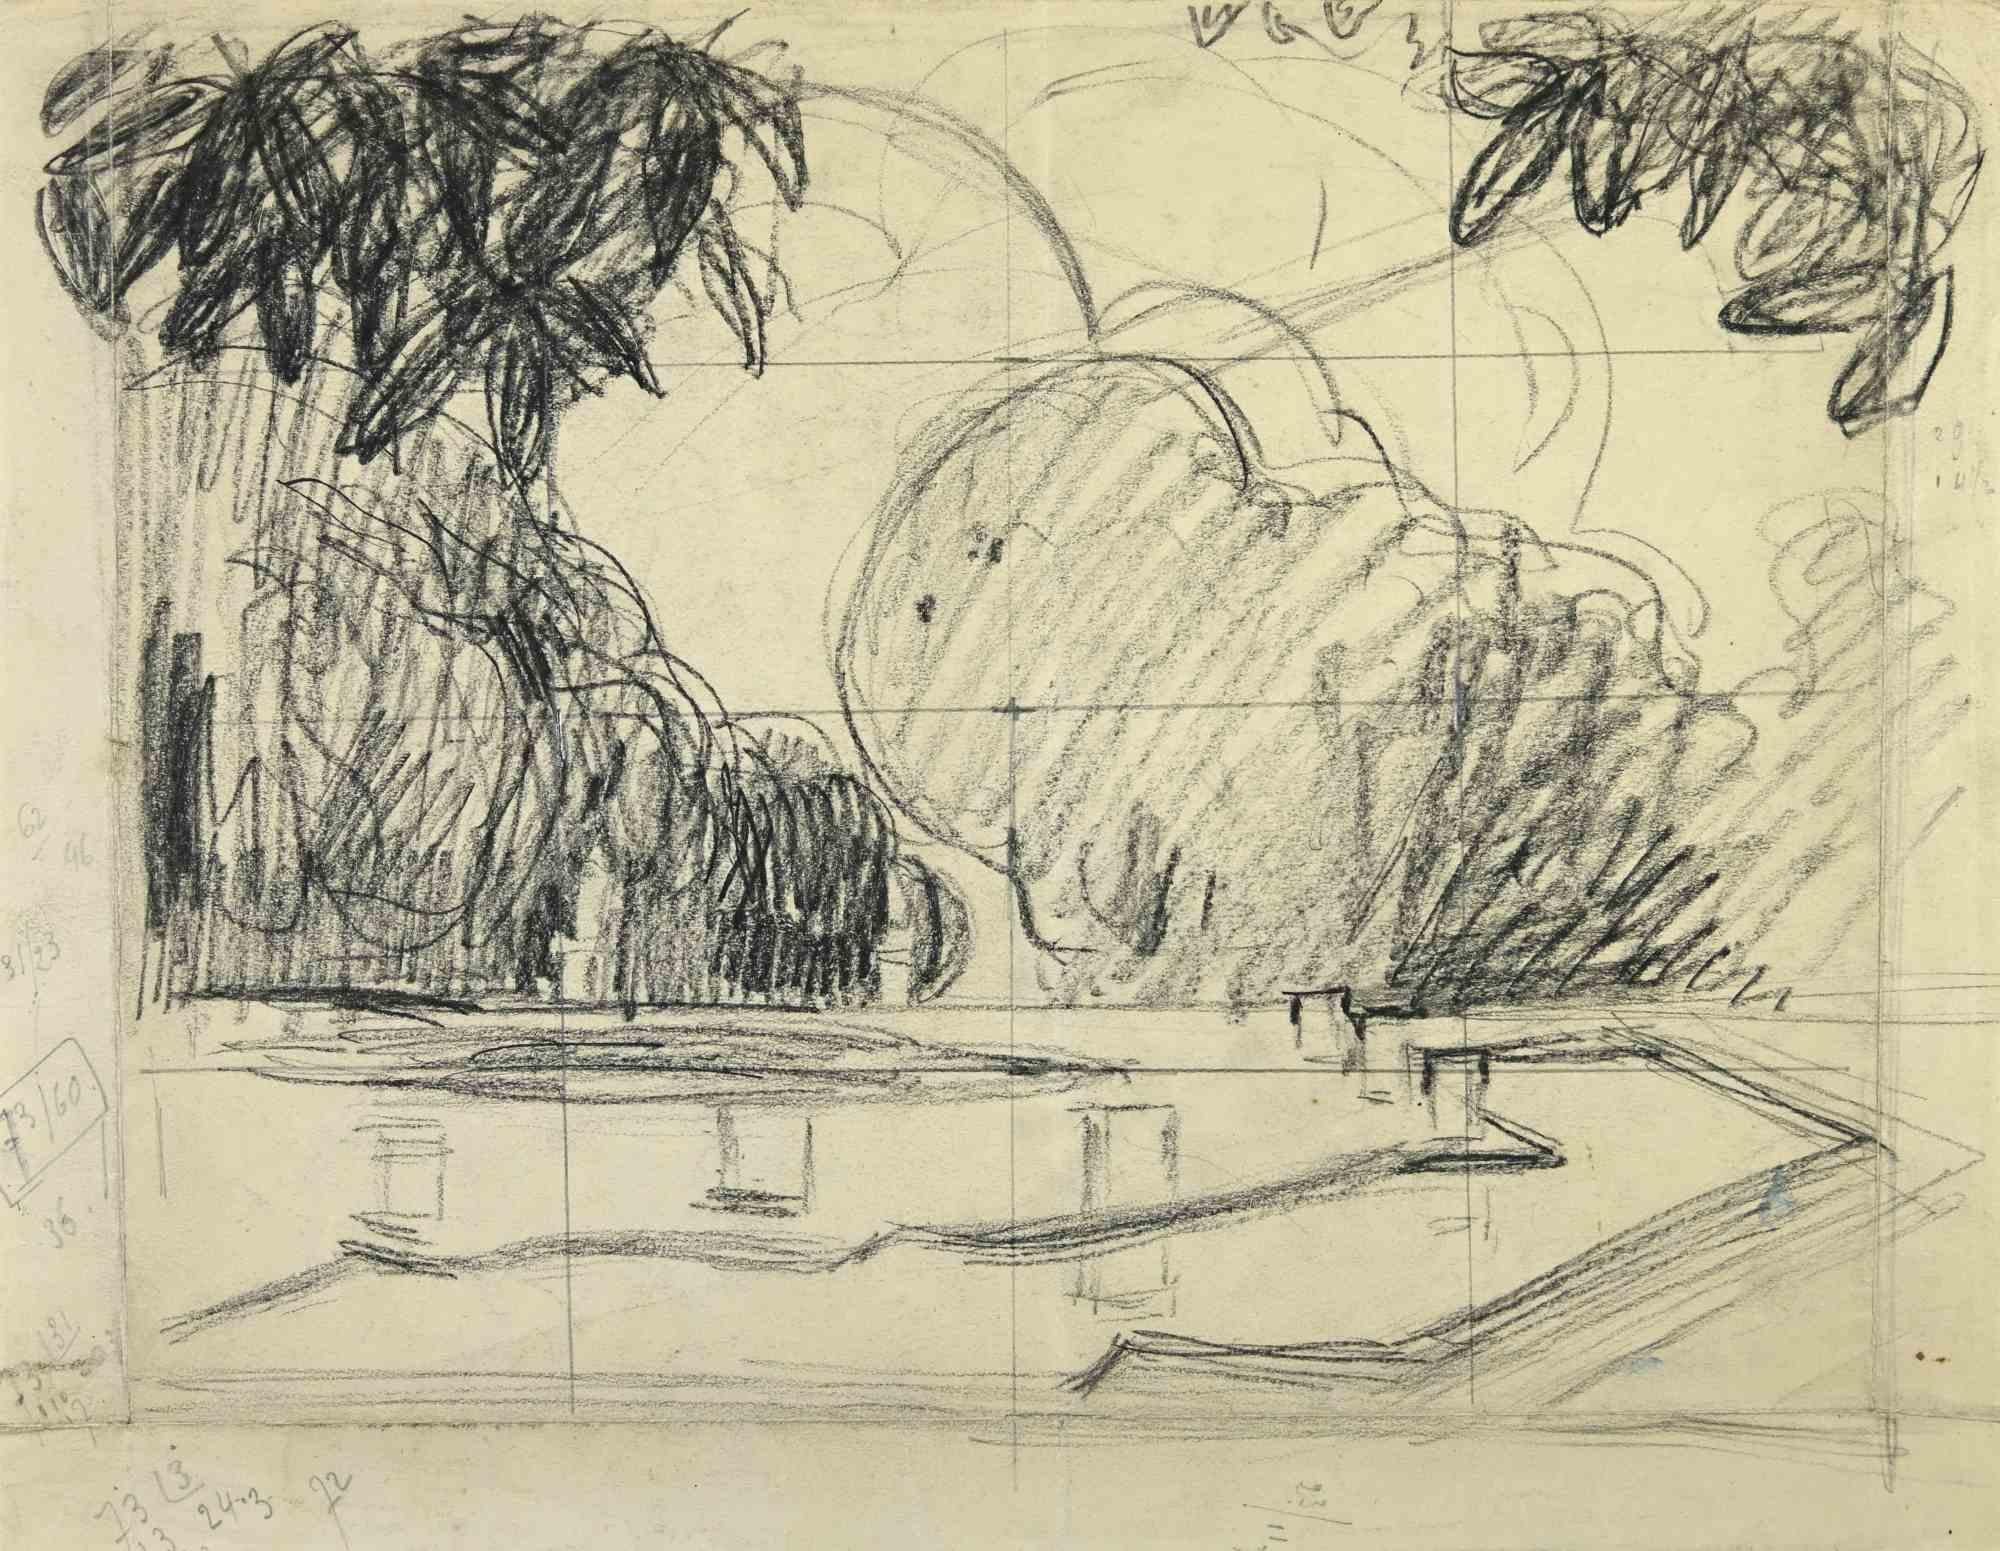 Landscape Study is a  drawing, realized in early 20th Century, by the French Artist André Meaux Saint-Marc (1885-1941).

Charcoal  on paper. Hand Signed on back.

